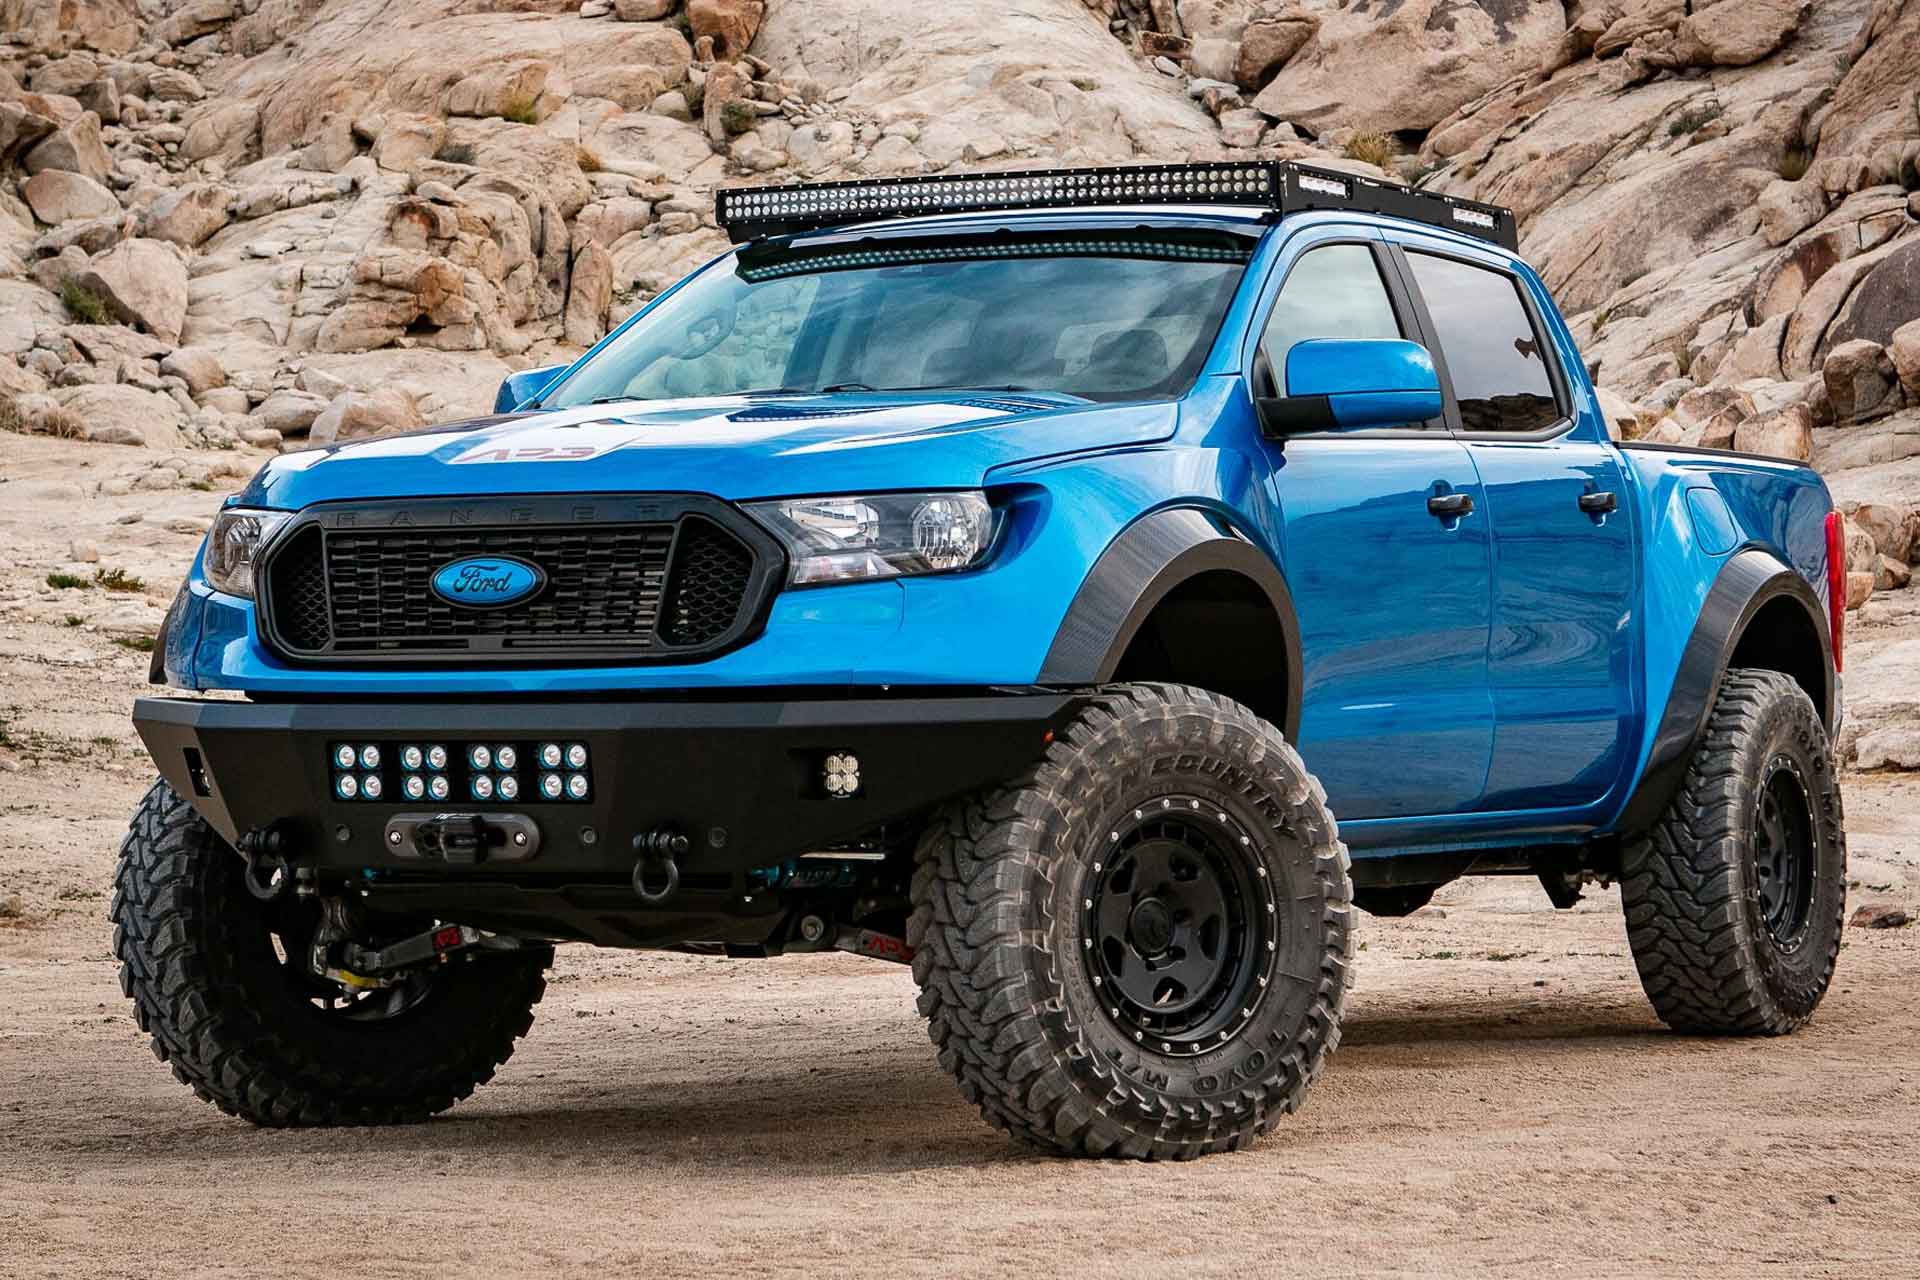 The Baja-style Prerunner is never the wrong answer, especially for light-du...